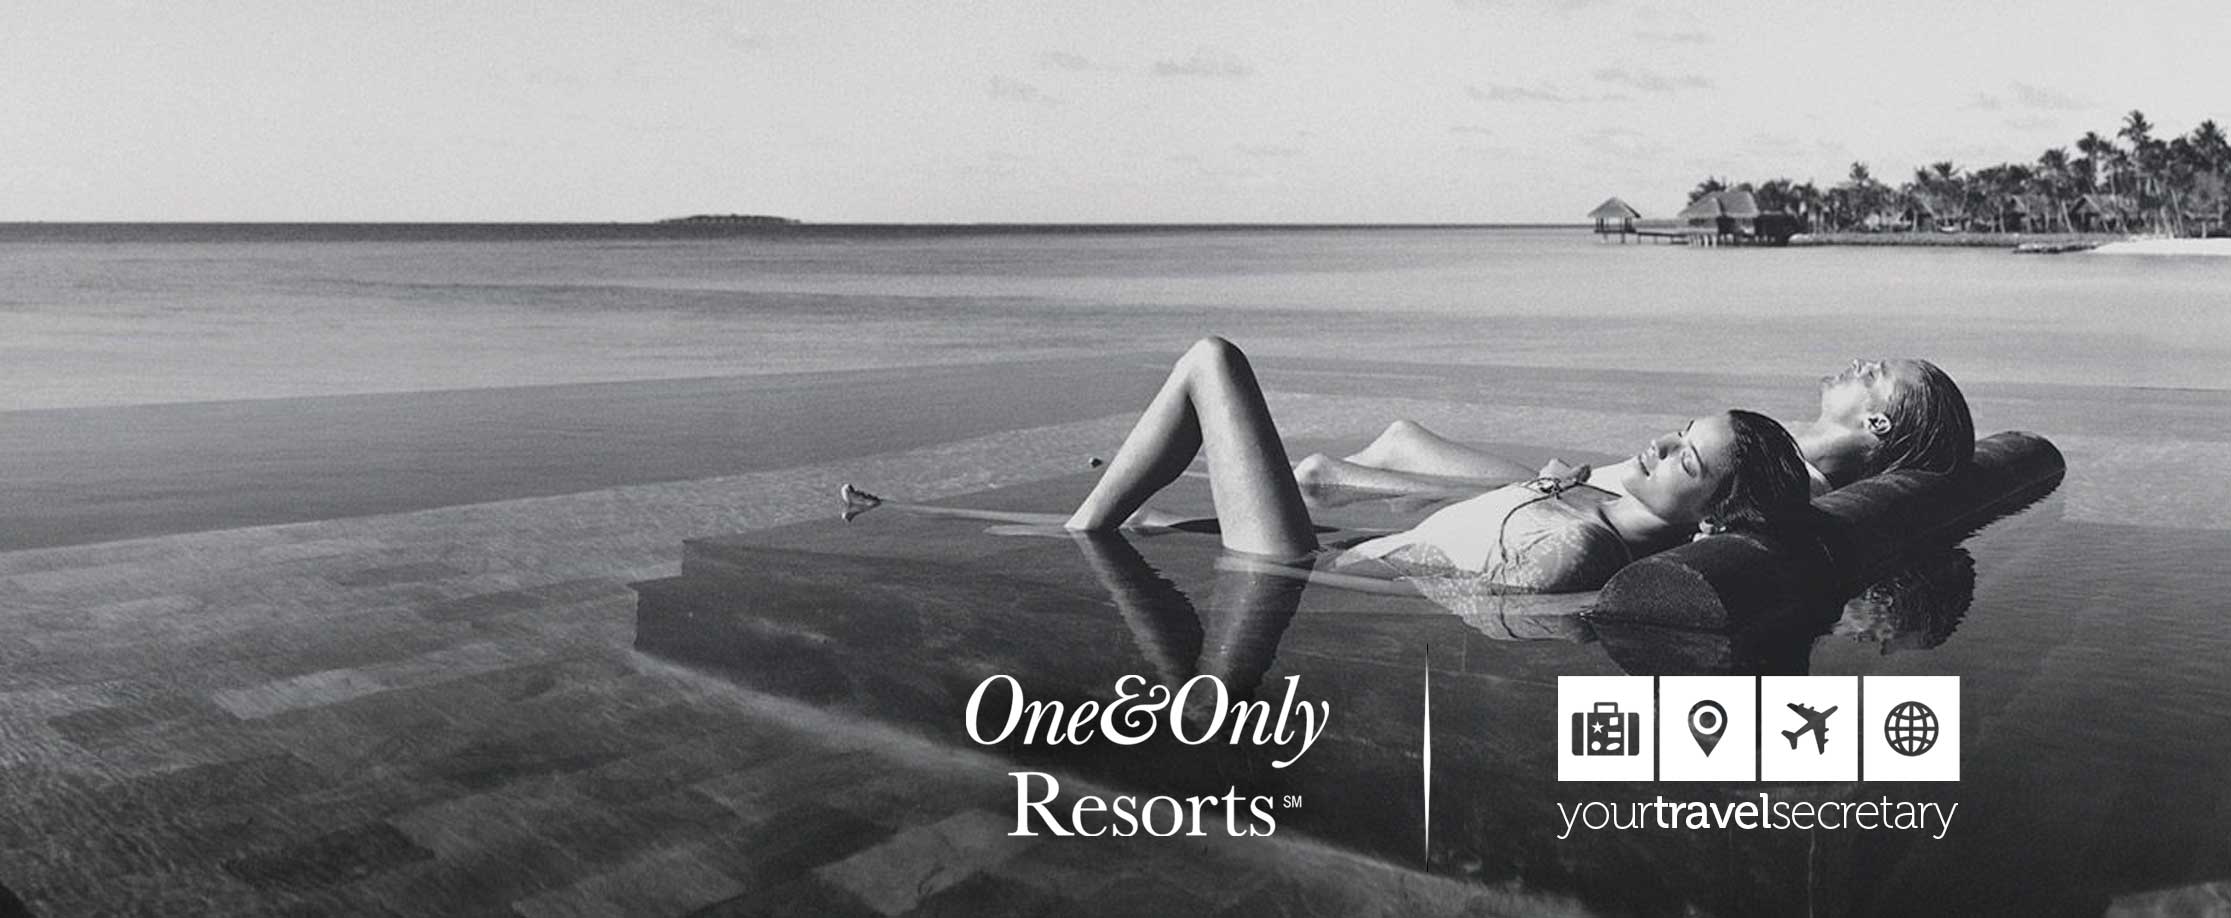 ONE&ONLY RESORTS